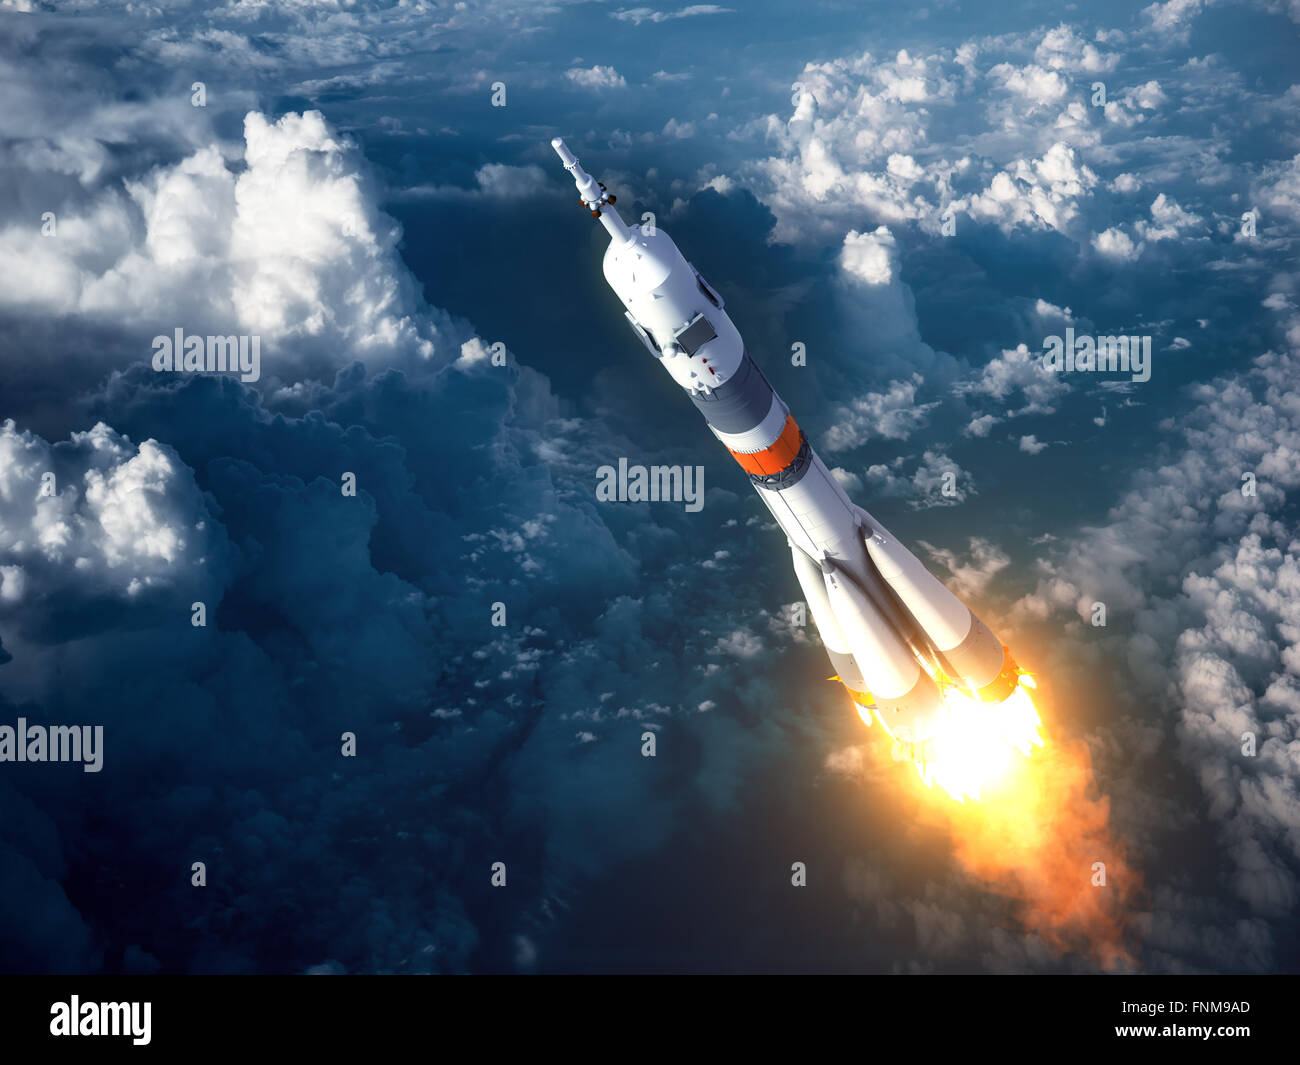 Carrier Rocket Launch In The Clouds. 3D Scene. Stock Photo